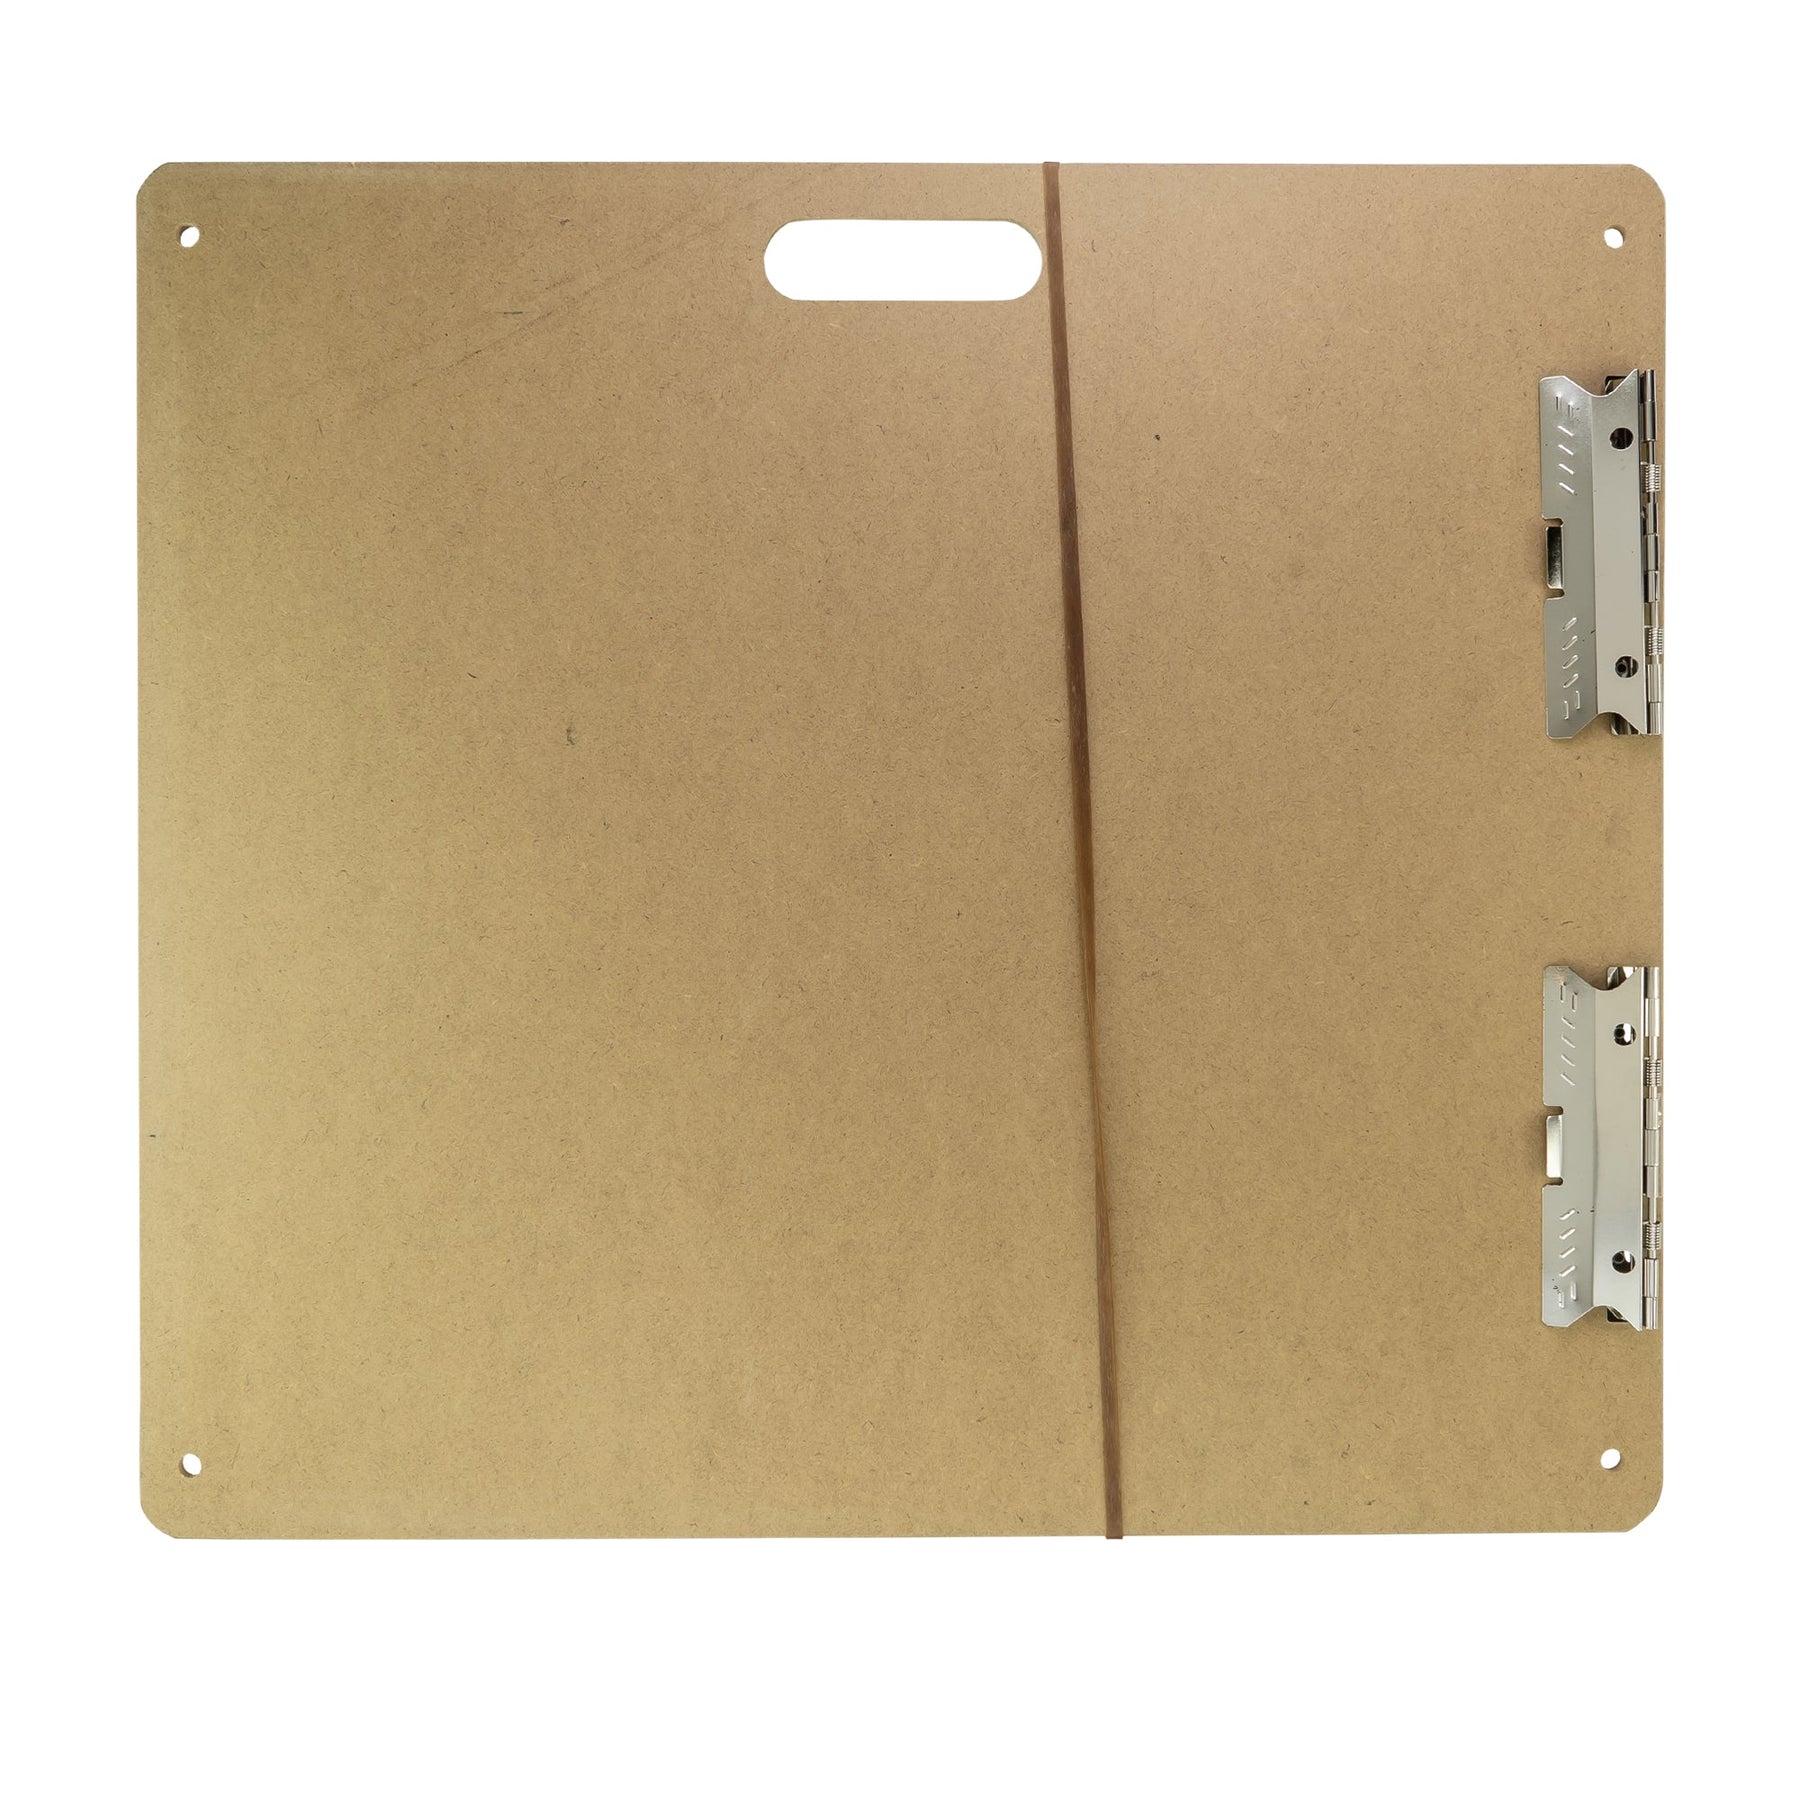 Field Sketch Board, Masonite with Cutout Handle, Clip, and Strap Holes, 13 Inch X 19 Inch